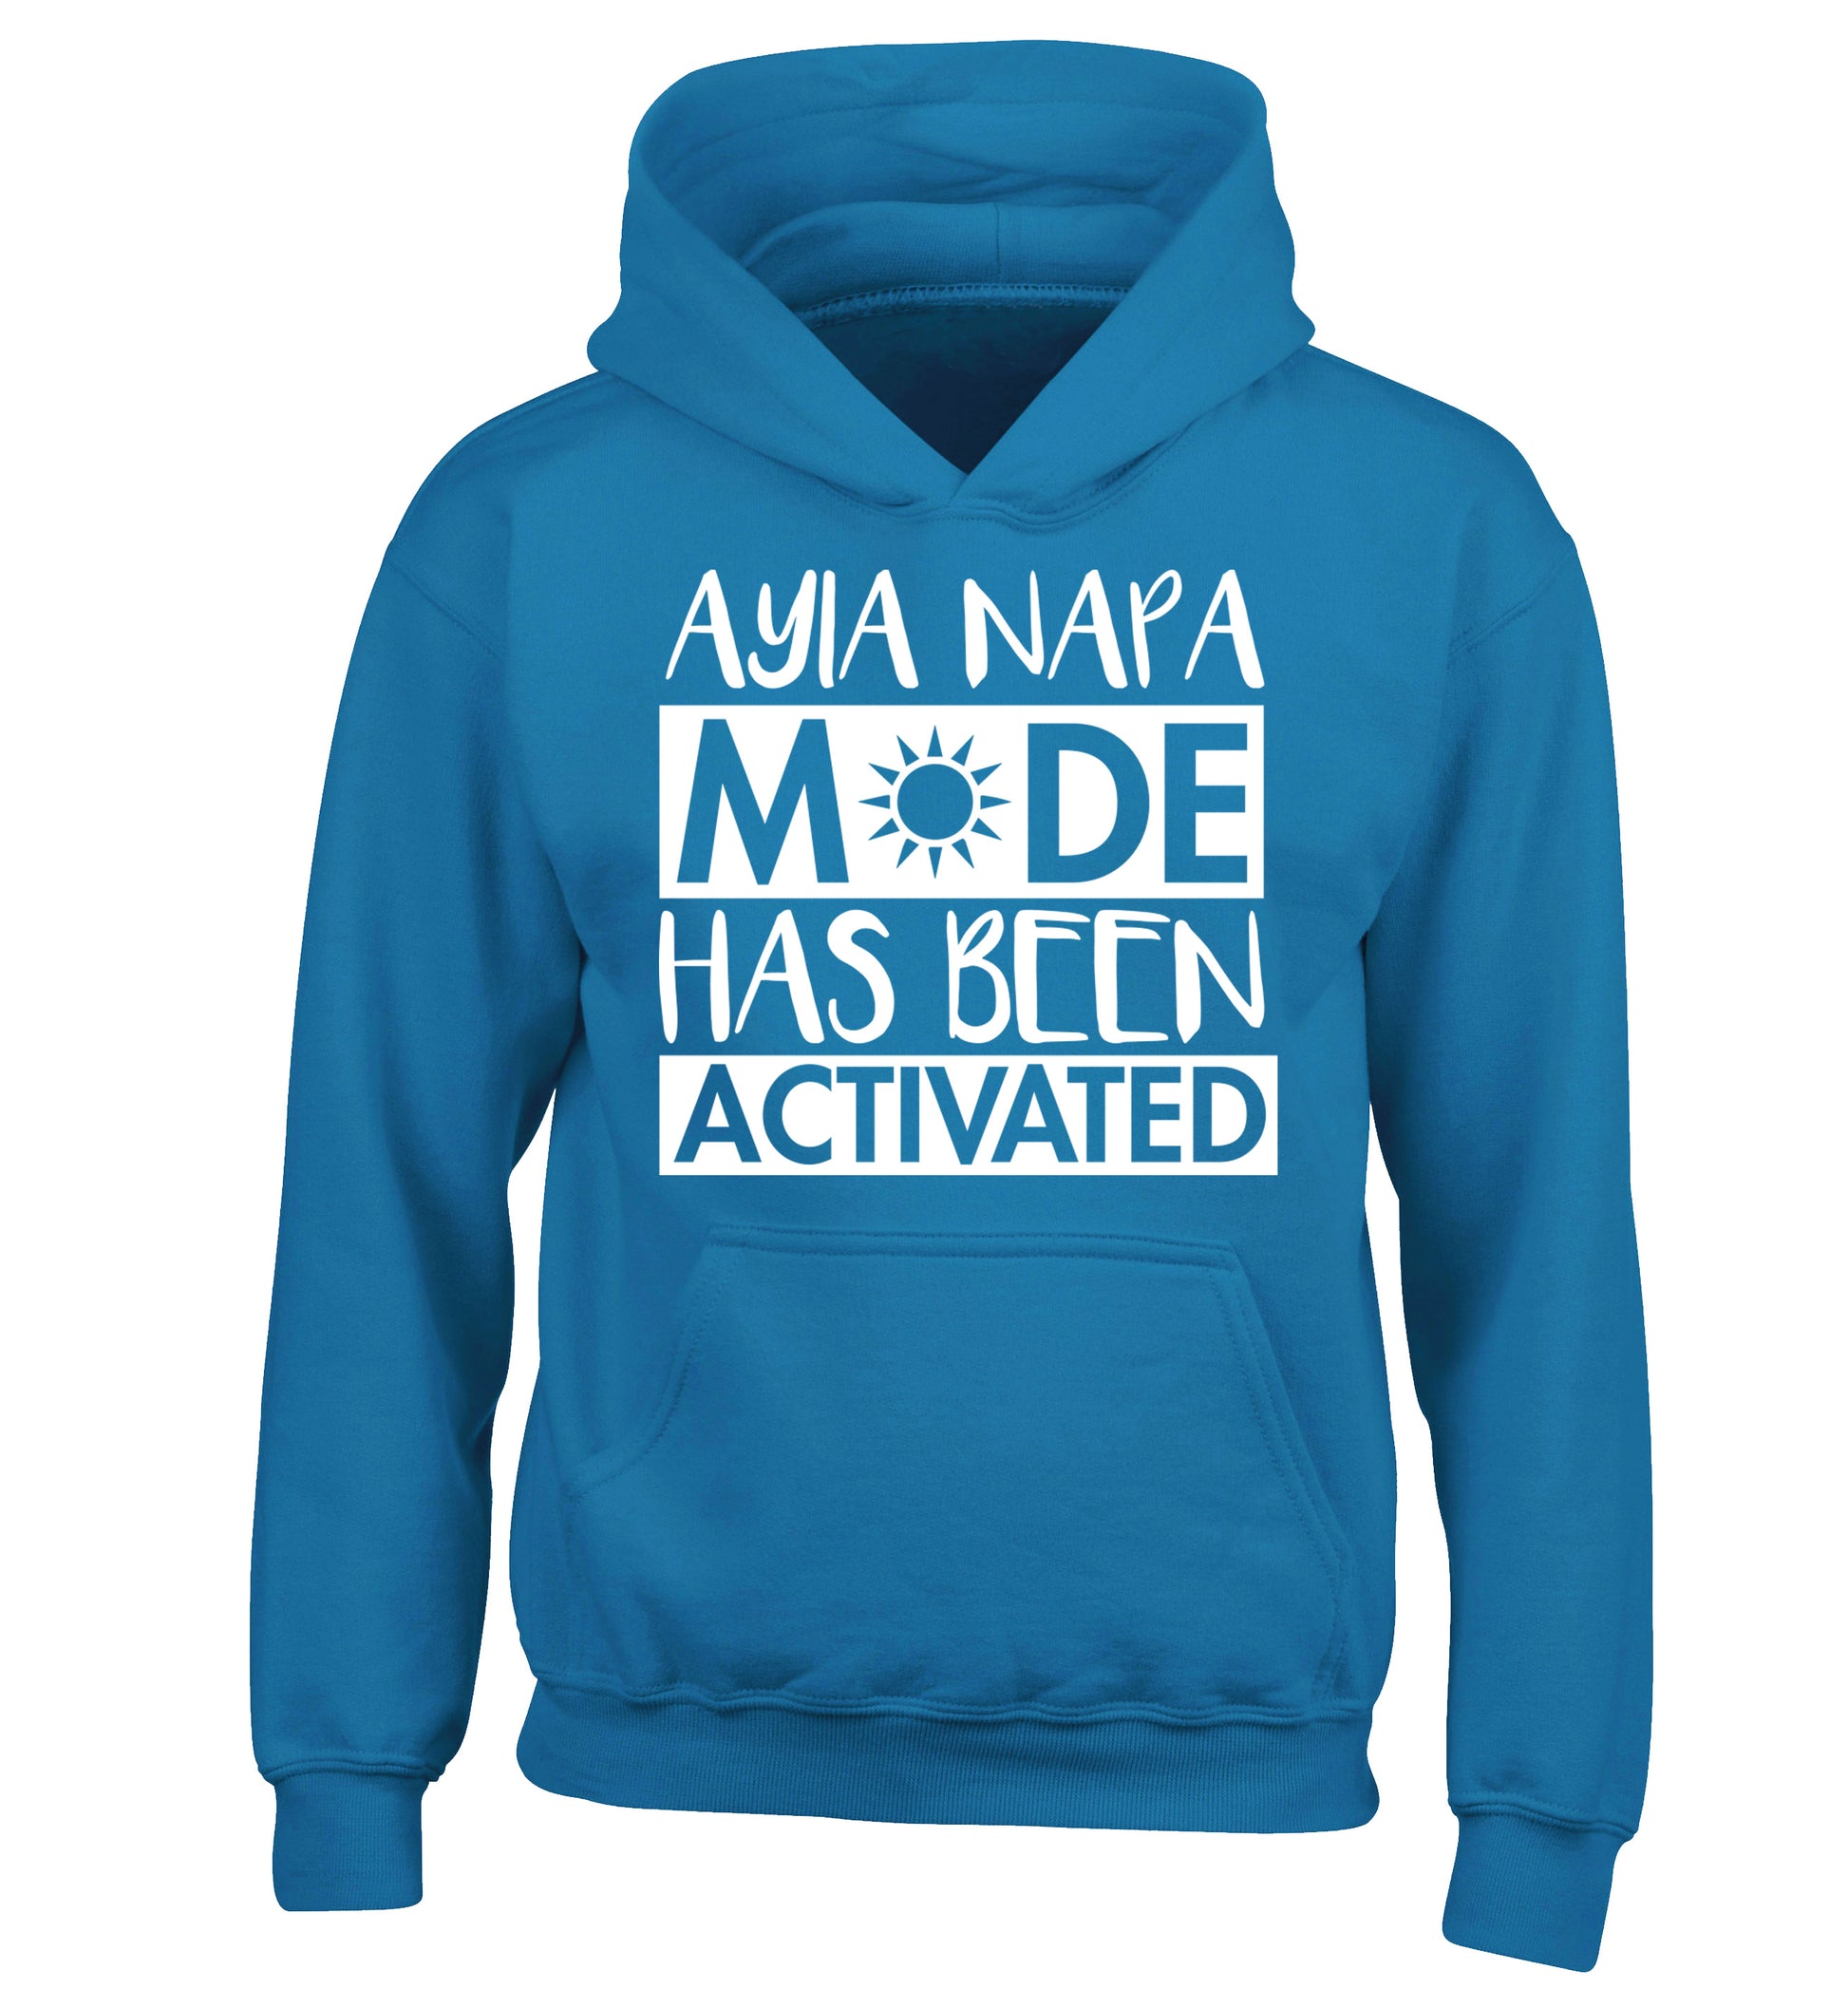 Ayia Napa mode has been activated children's blue hoodie 12-13 Years